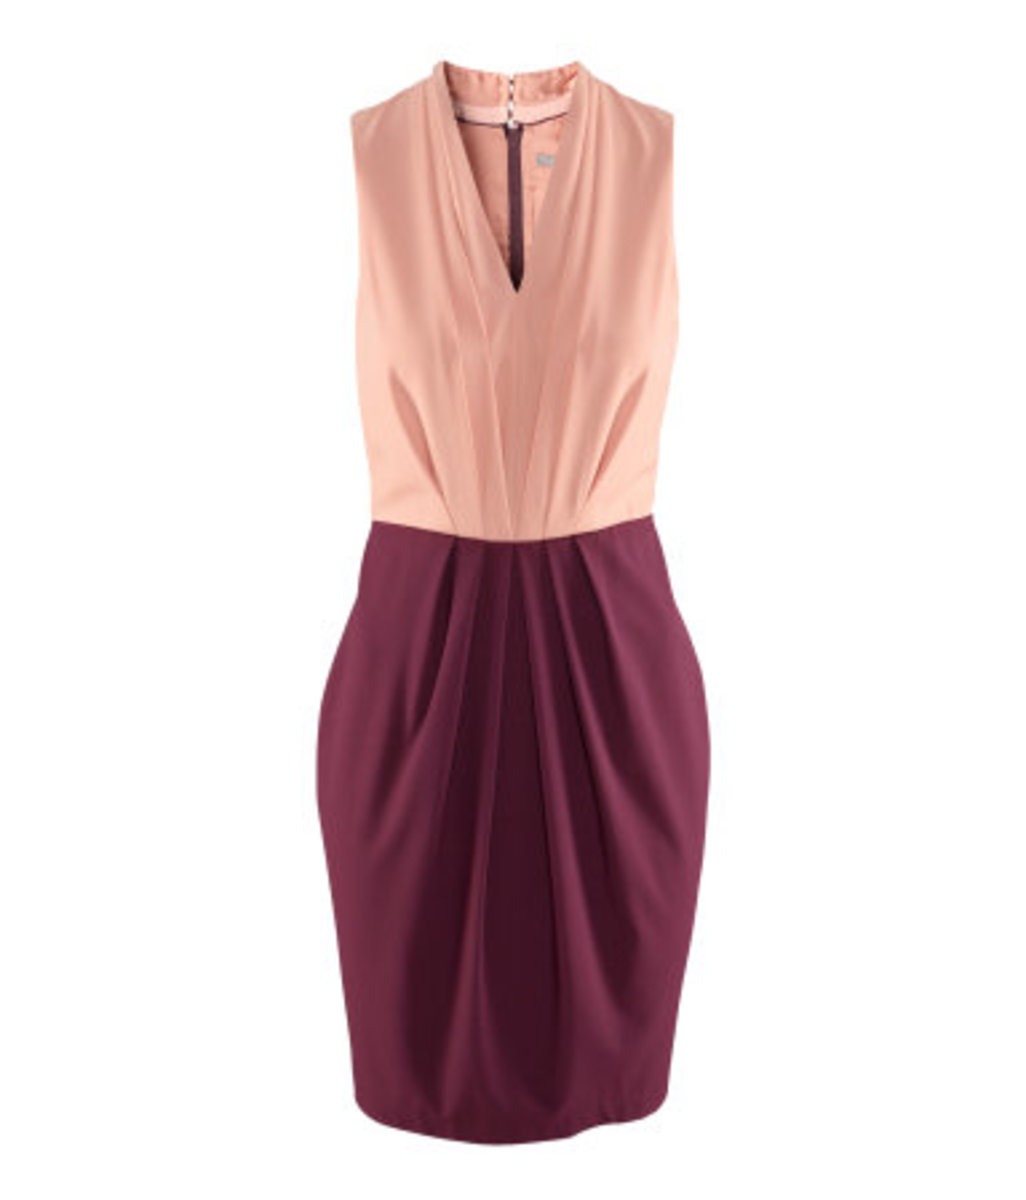 This H&M dress could be a perfect choice for an hourglass.